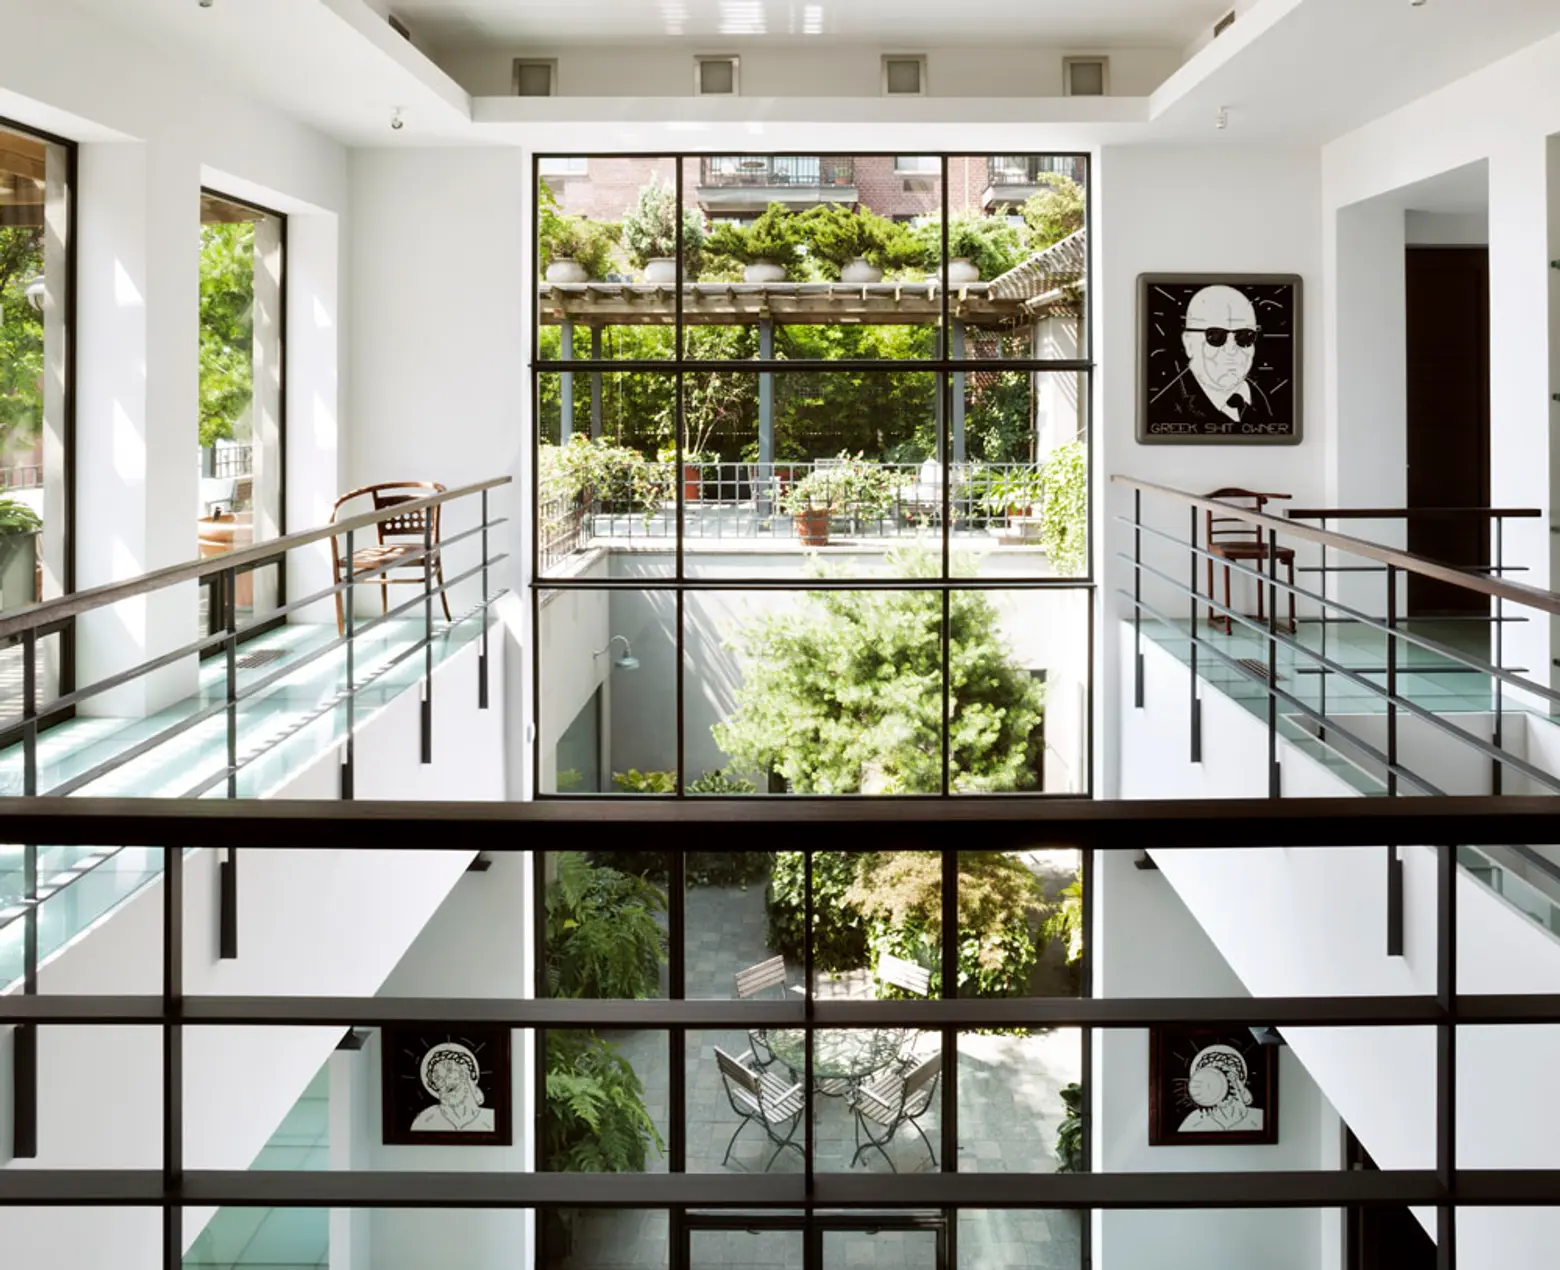 Is the Third Time a Charm for This $40M Penthouse with Glass Floors and a Seven-Car Garage?